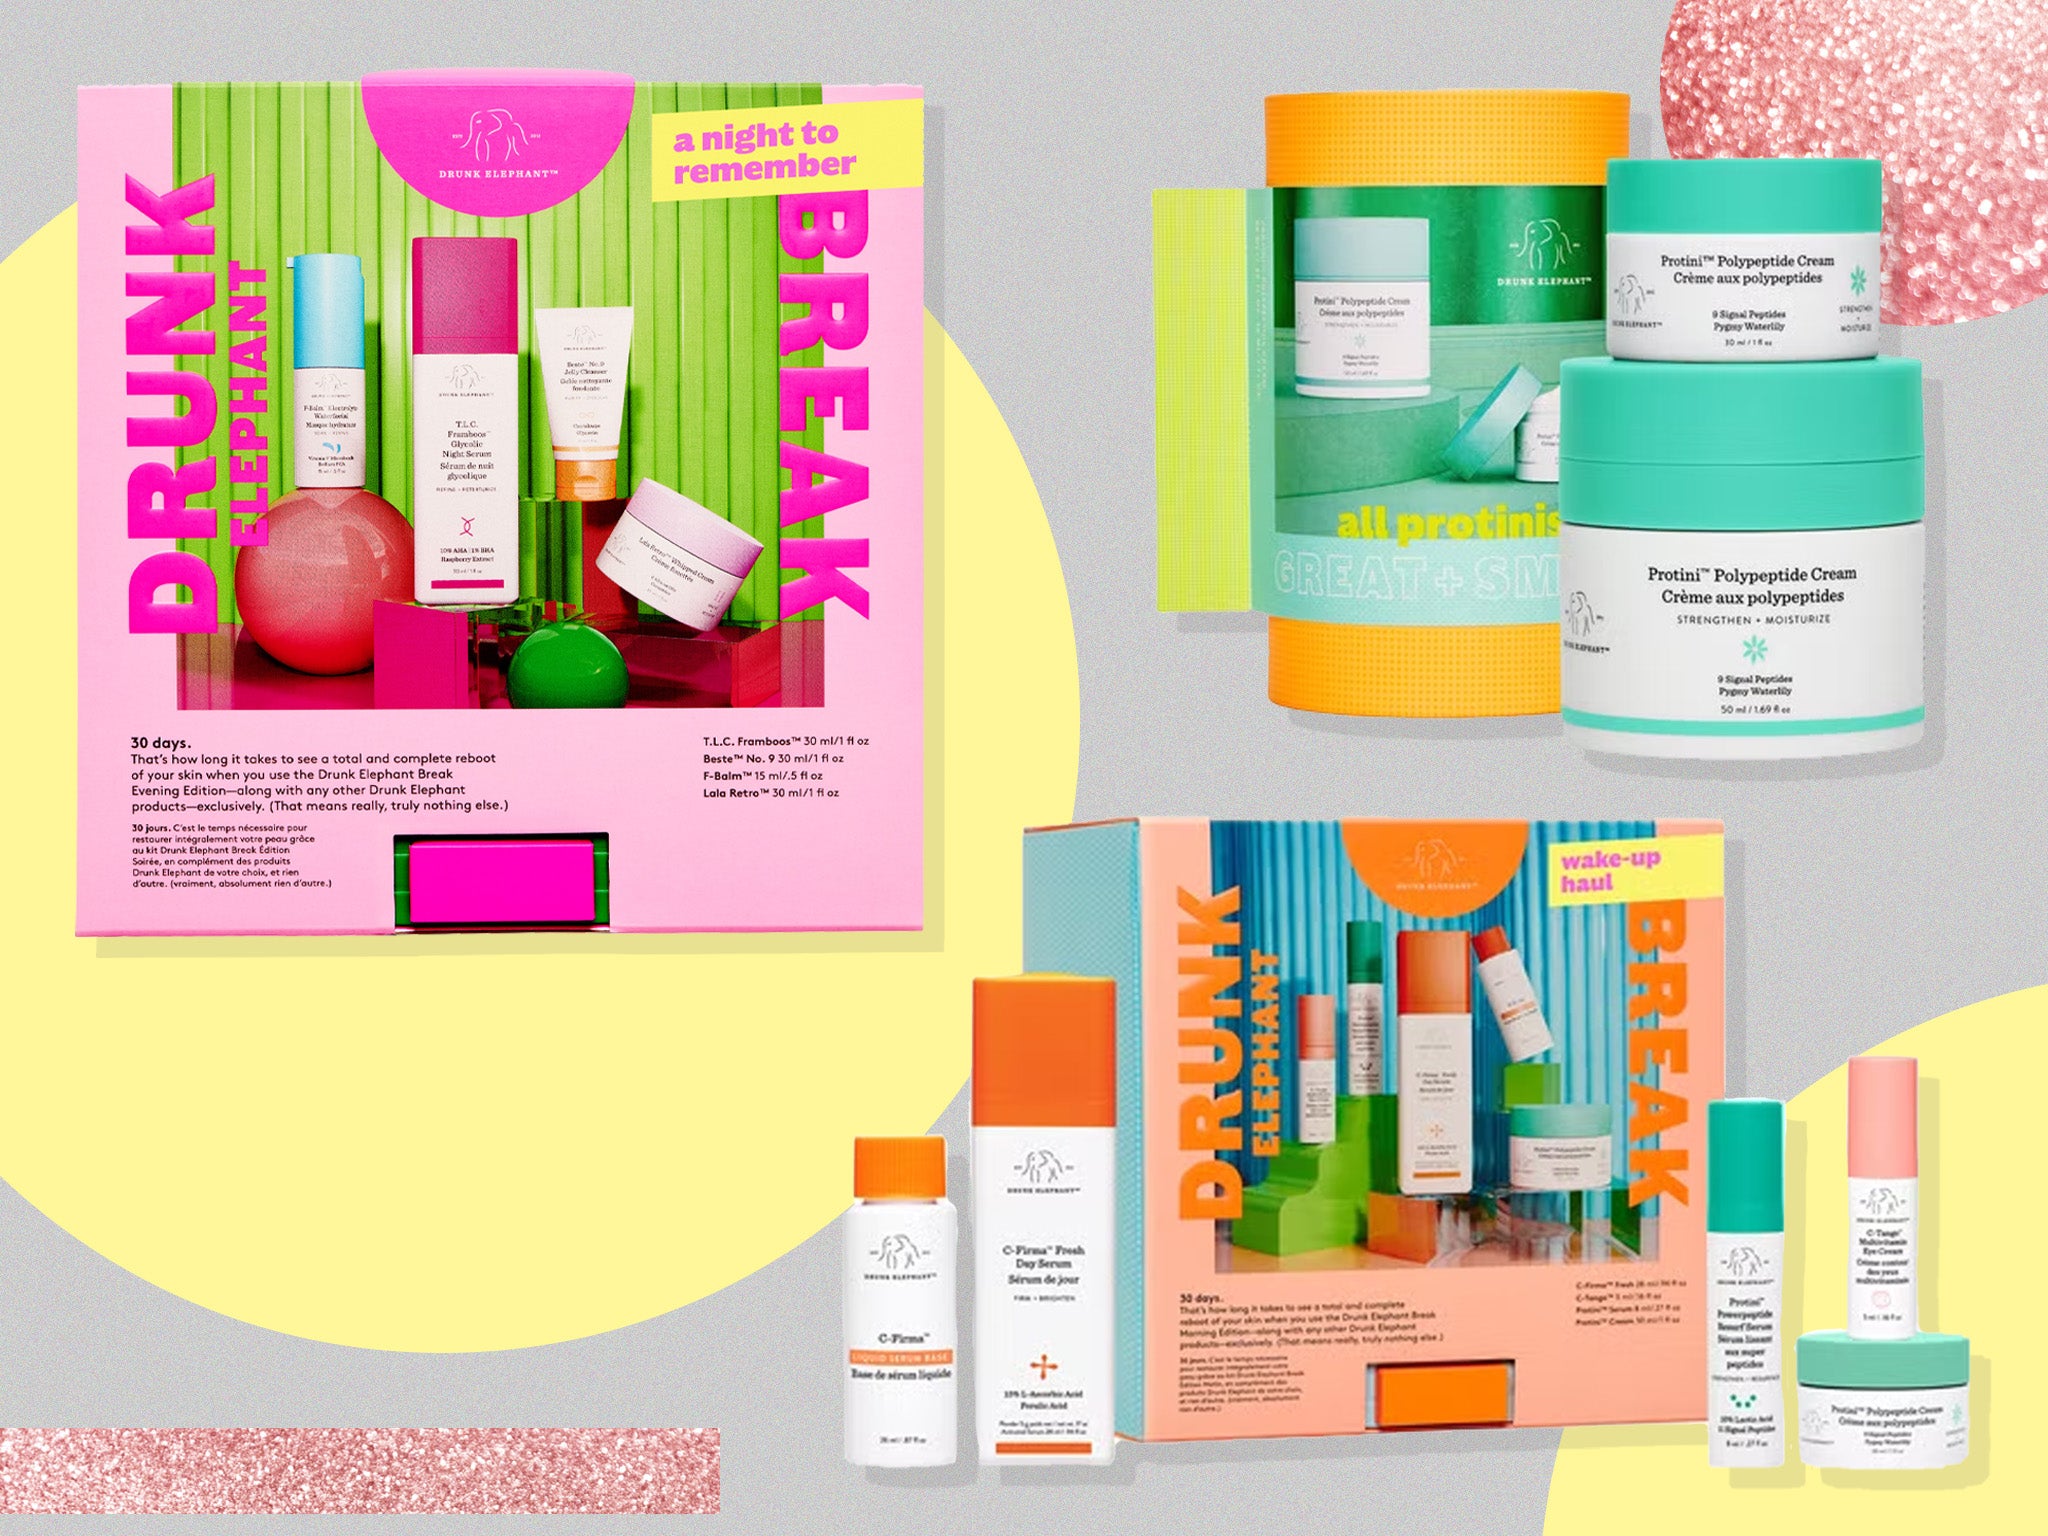 The sets are presented in signature fun, bright packaging